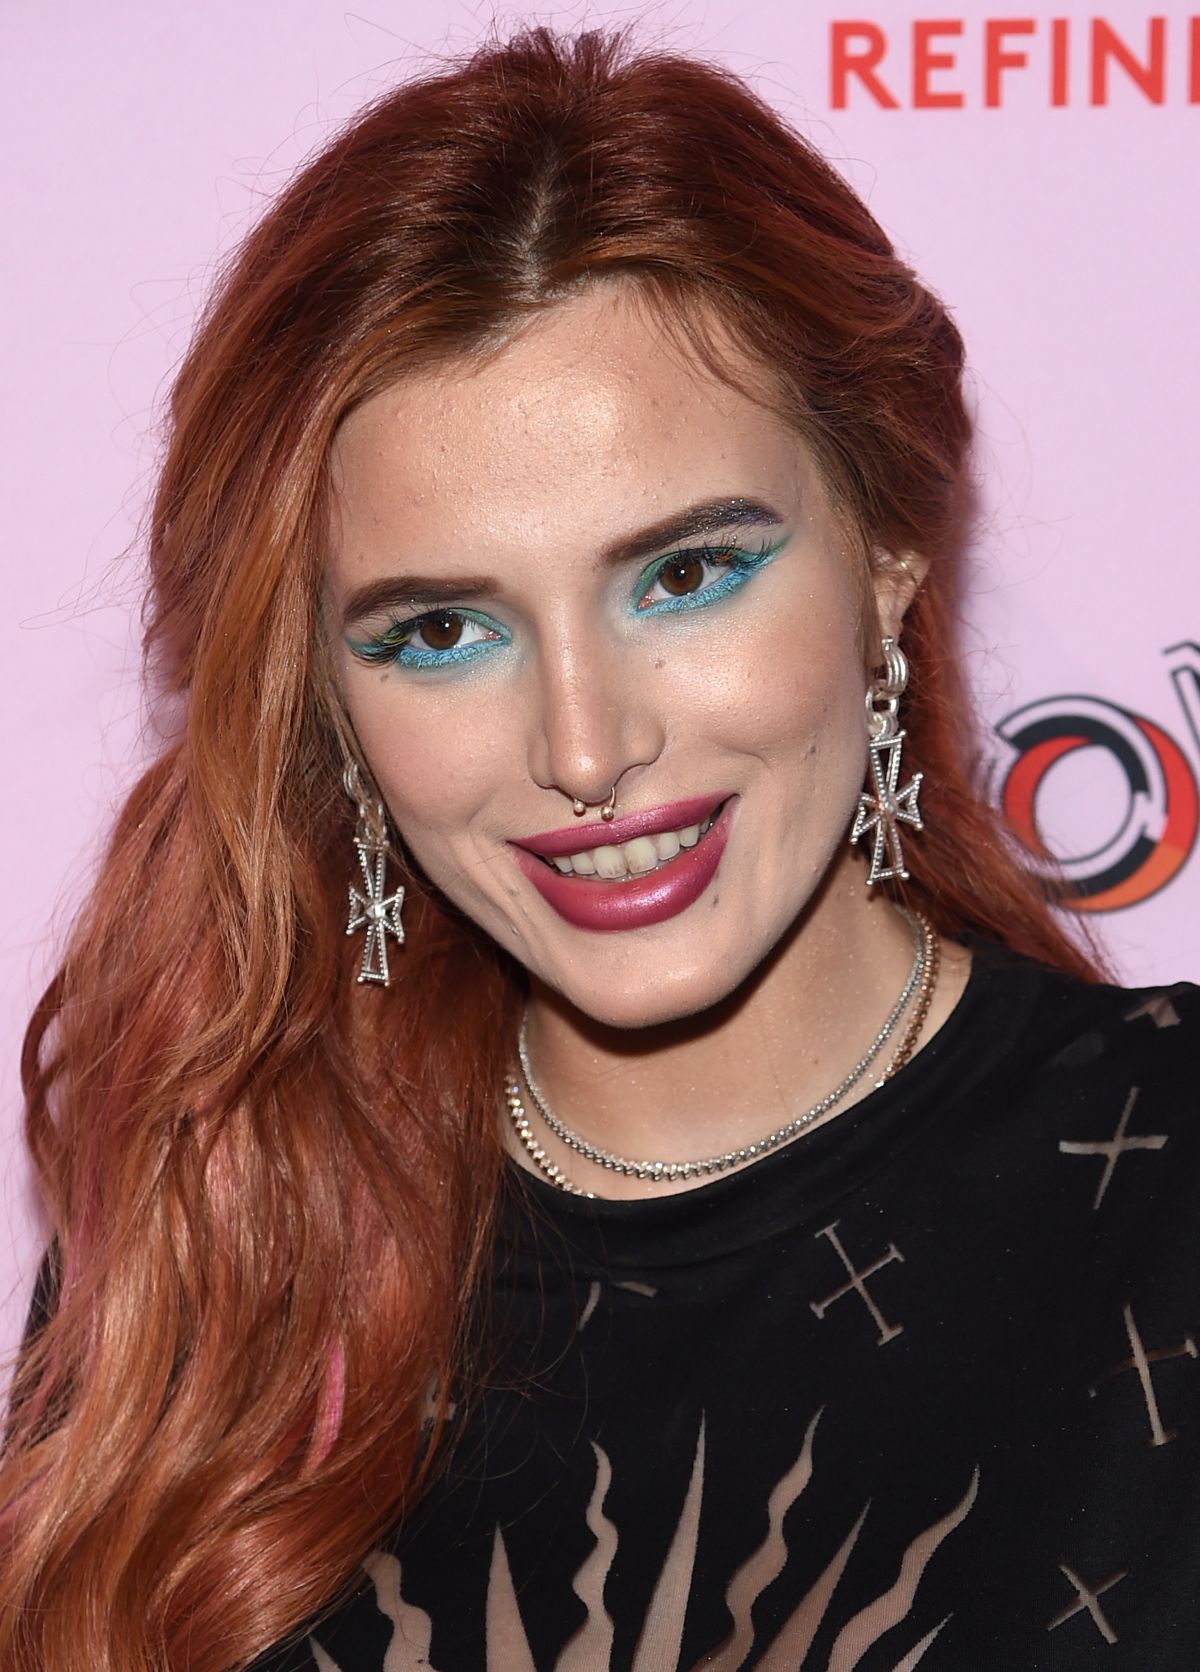 bella-thorne-at-refinery29-third-annual-29rooms-turn-it-into-art-event-in-brooklyn-09-07-2017_3.jpg